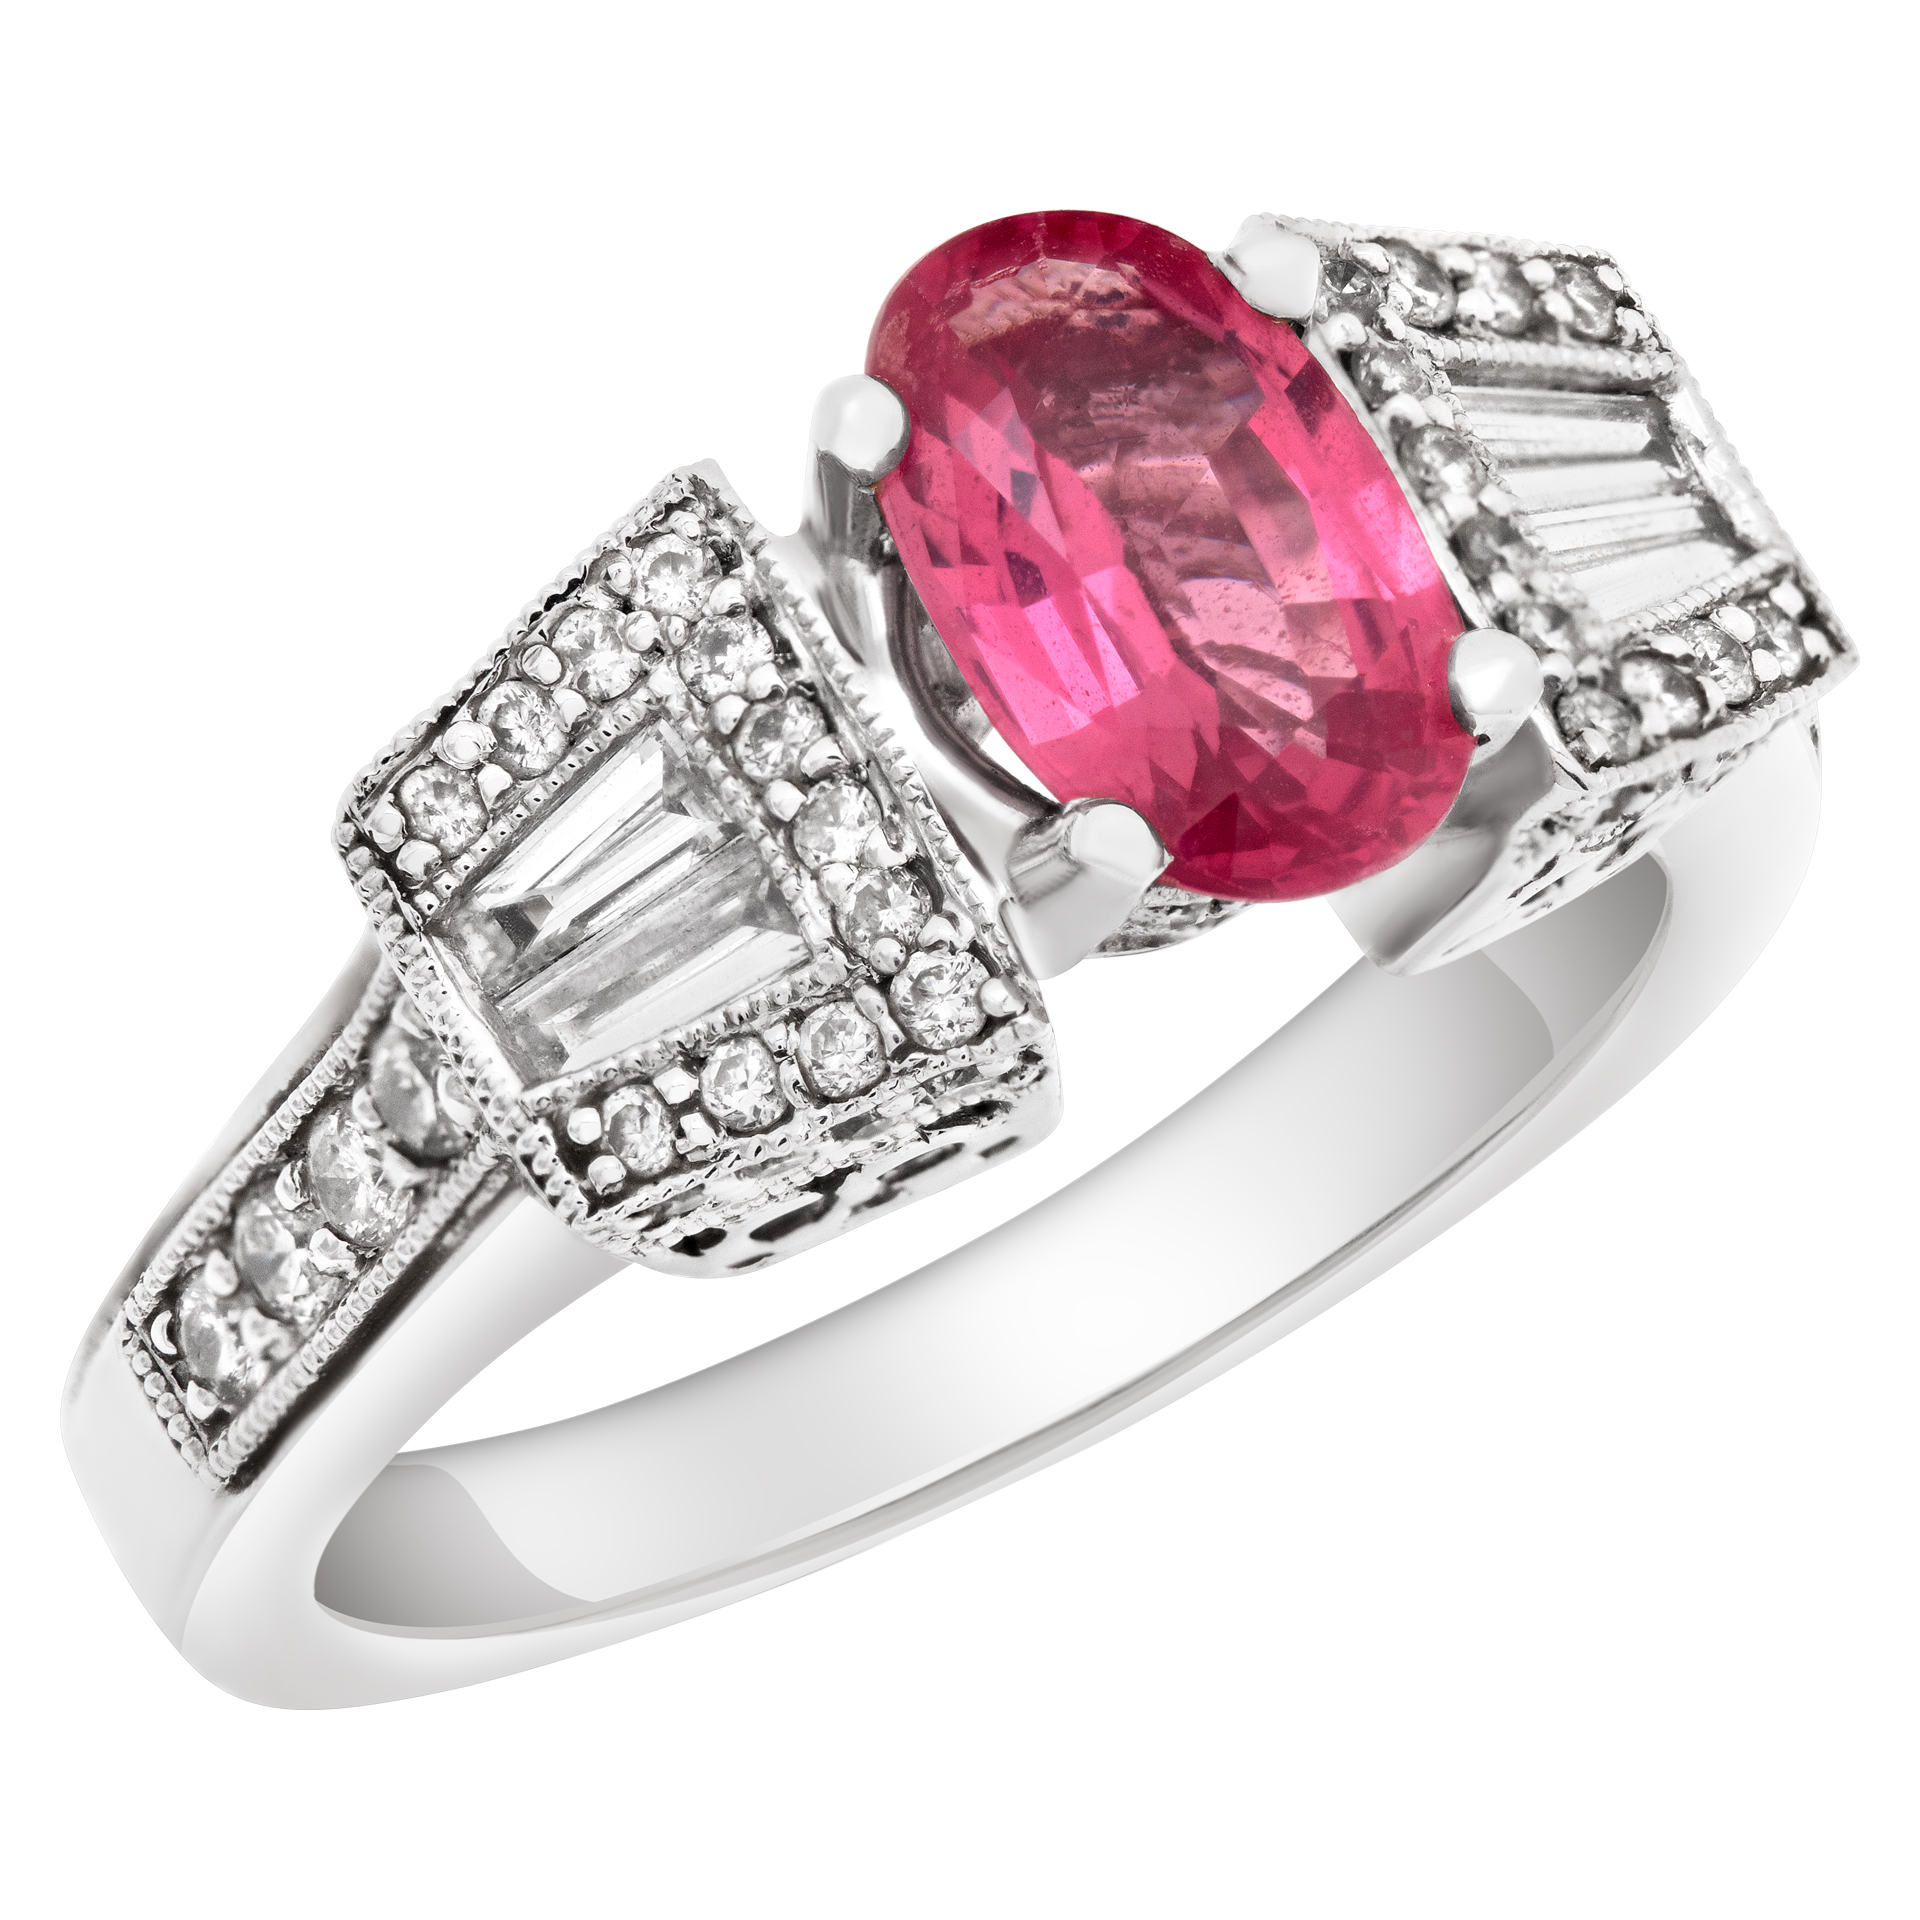 Oval brilliant cut pink spinel (approx. 2 carats) & diamonds ring set in 14K white gold image 3